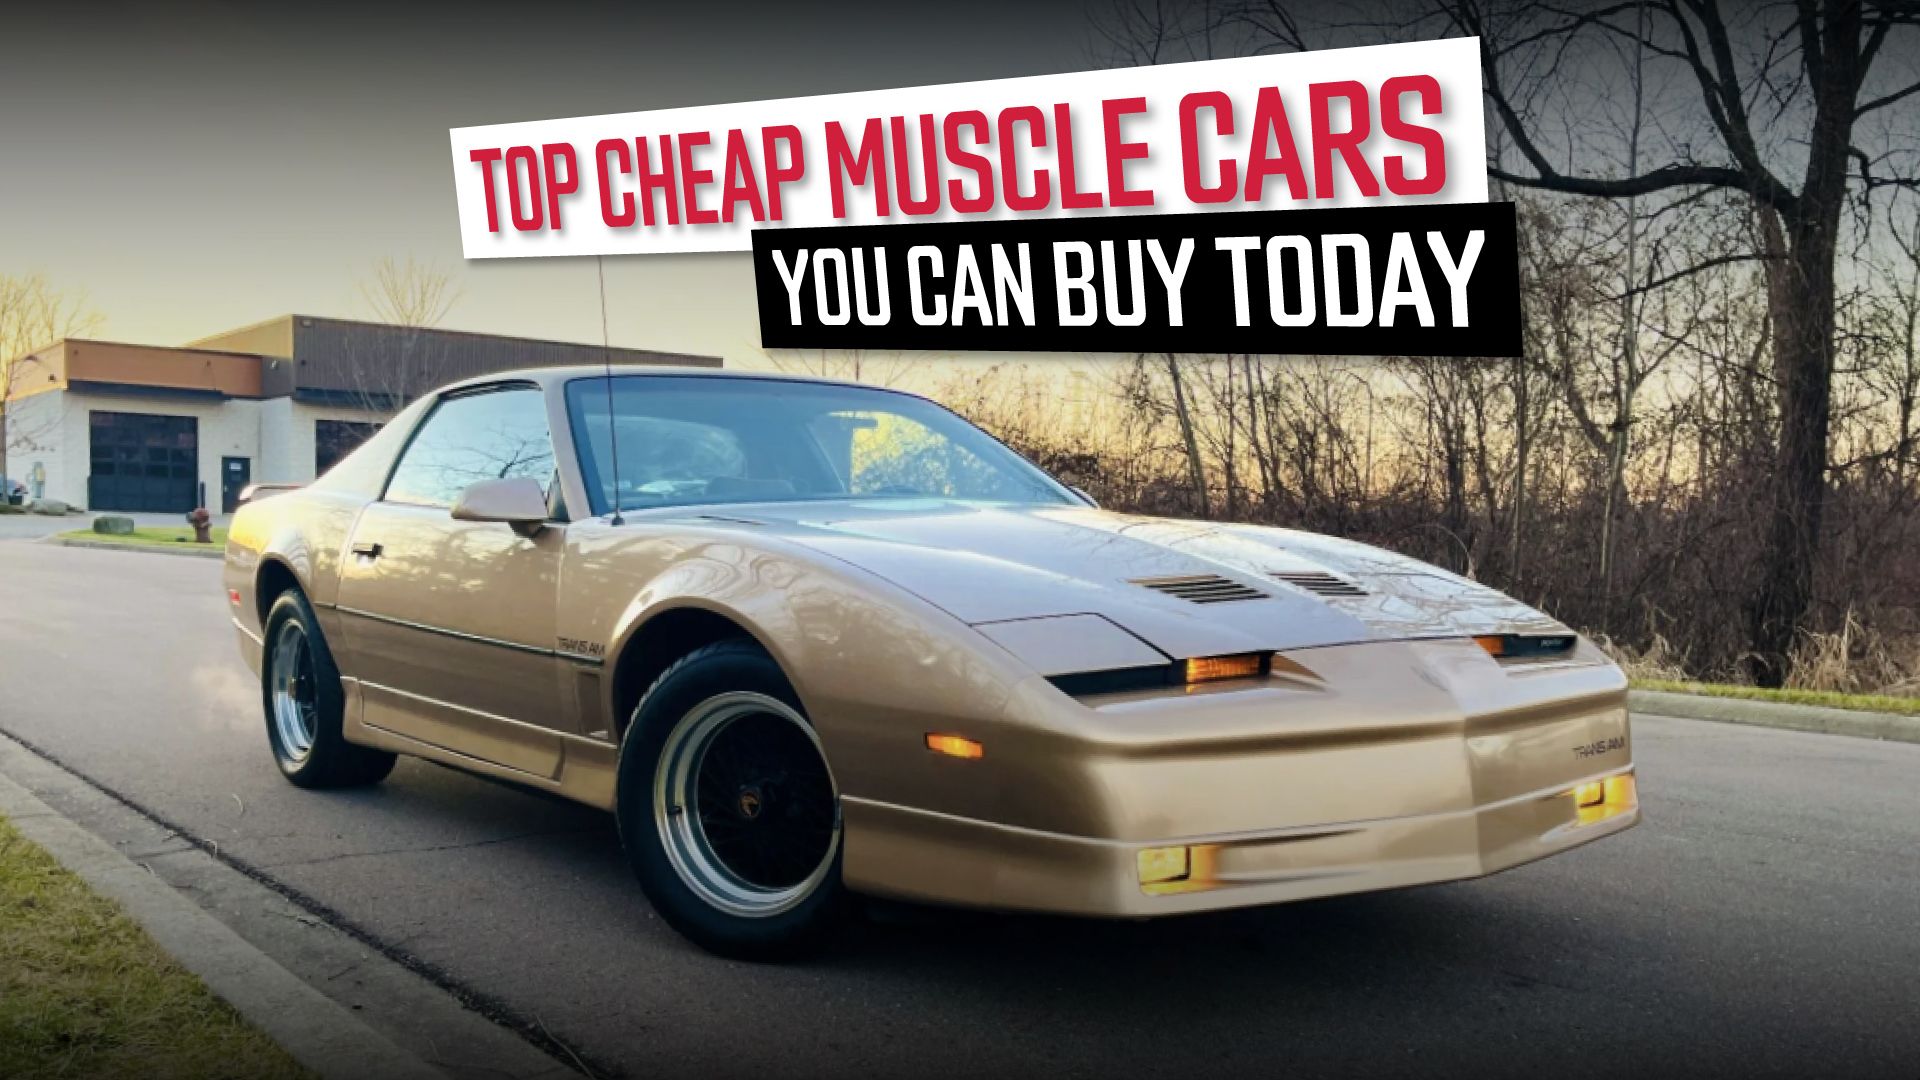 Top-Cheap-Muscle-Cars-You-Can-Buy-Today